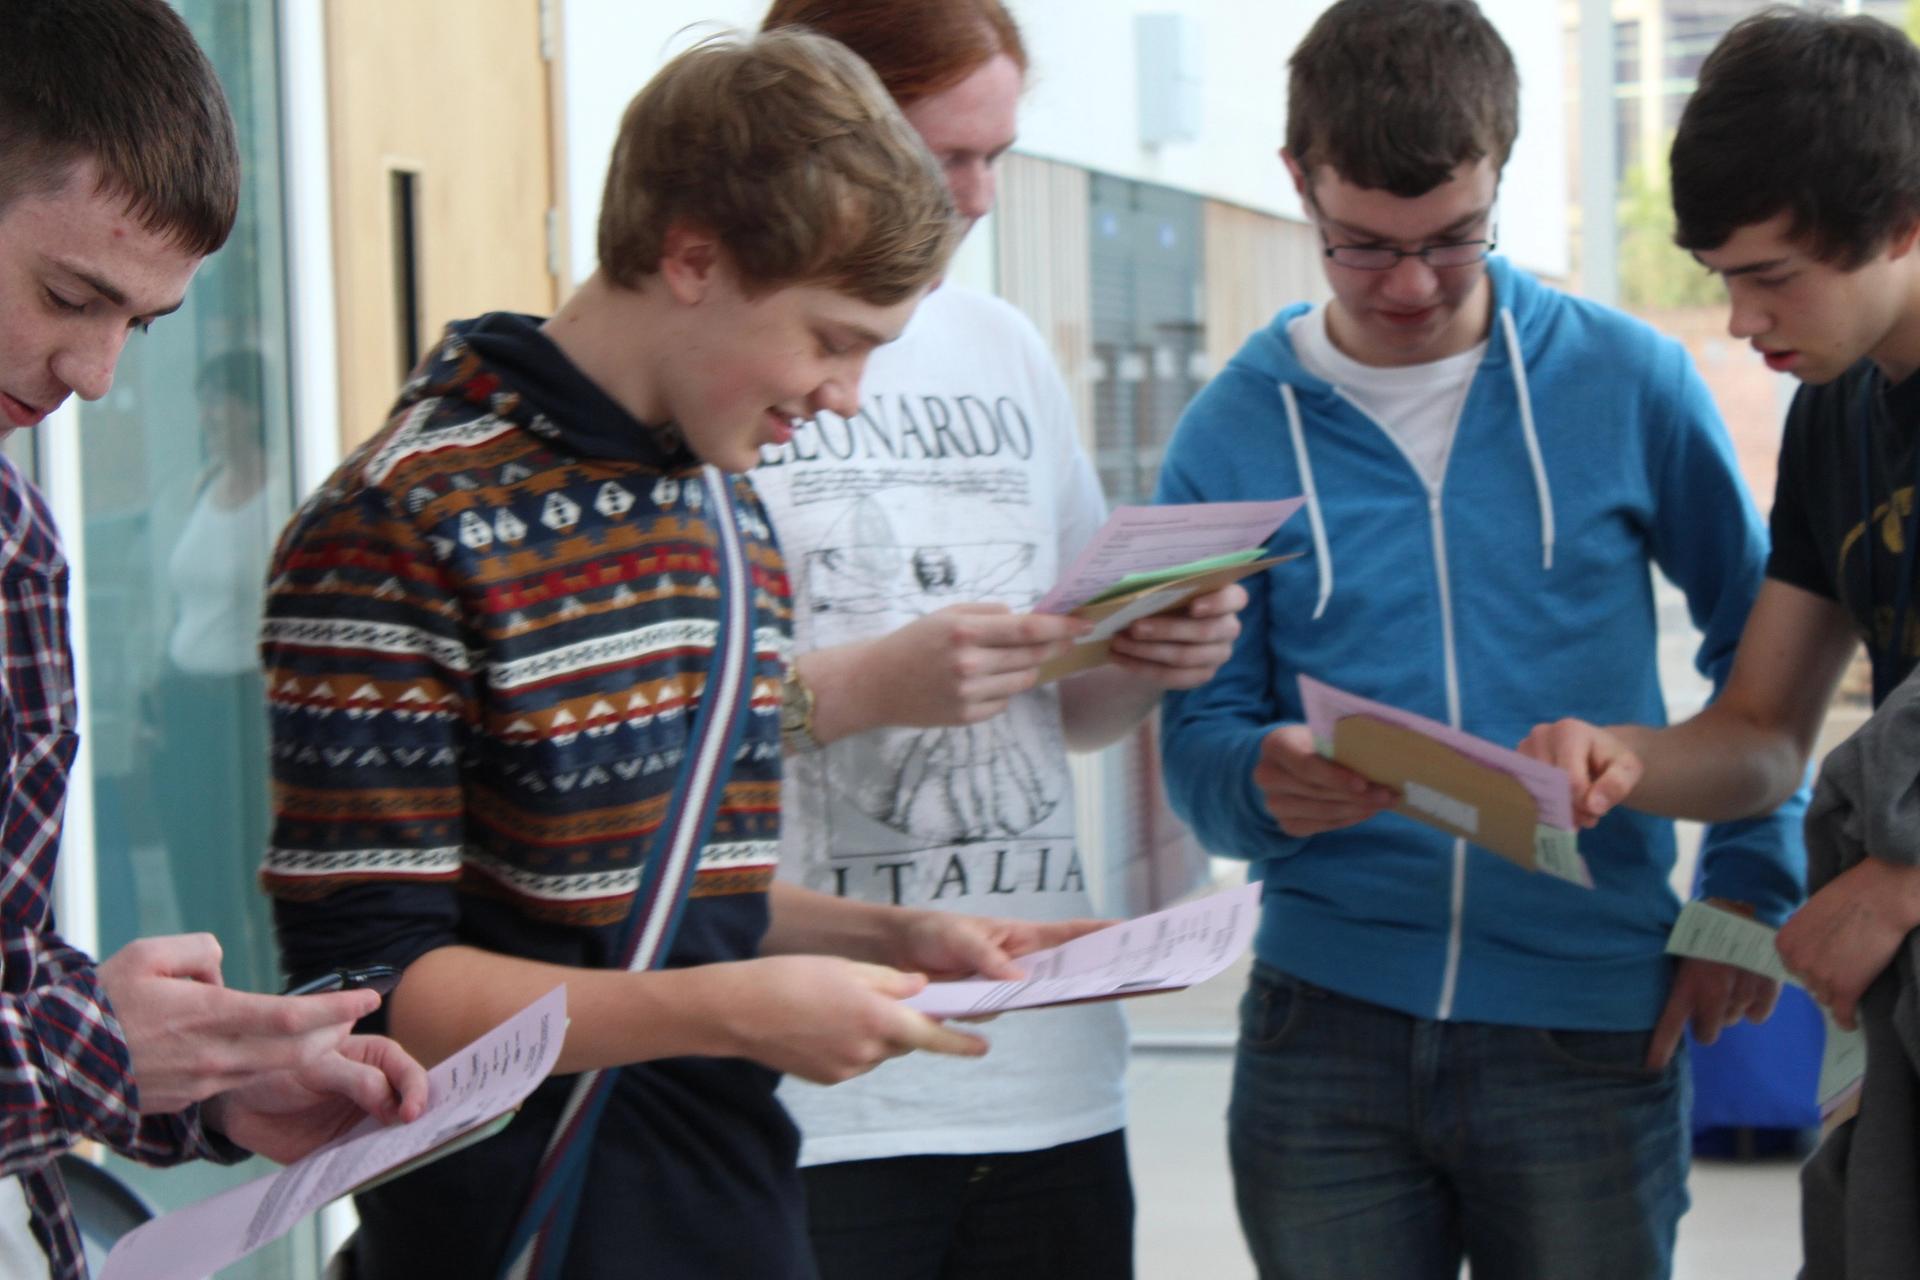 A-level results day at City of Stoke on Trent Sixth Form College Courtesy of City of Stoke on Trent Sixth Form College via Flickr